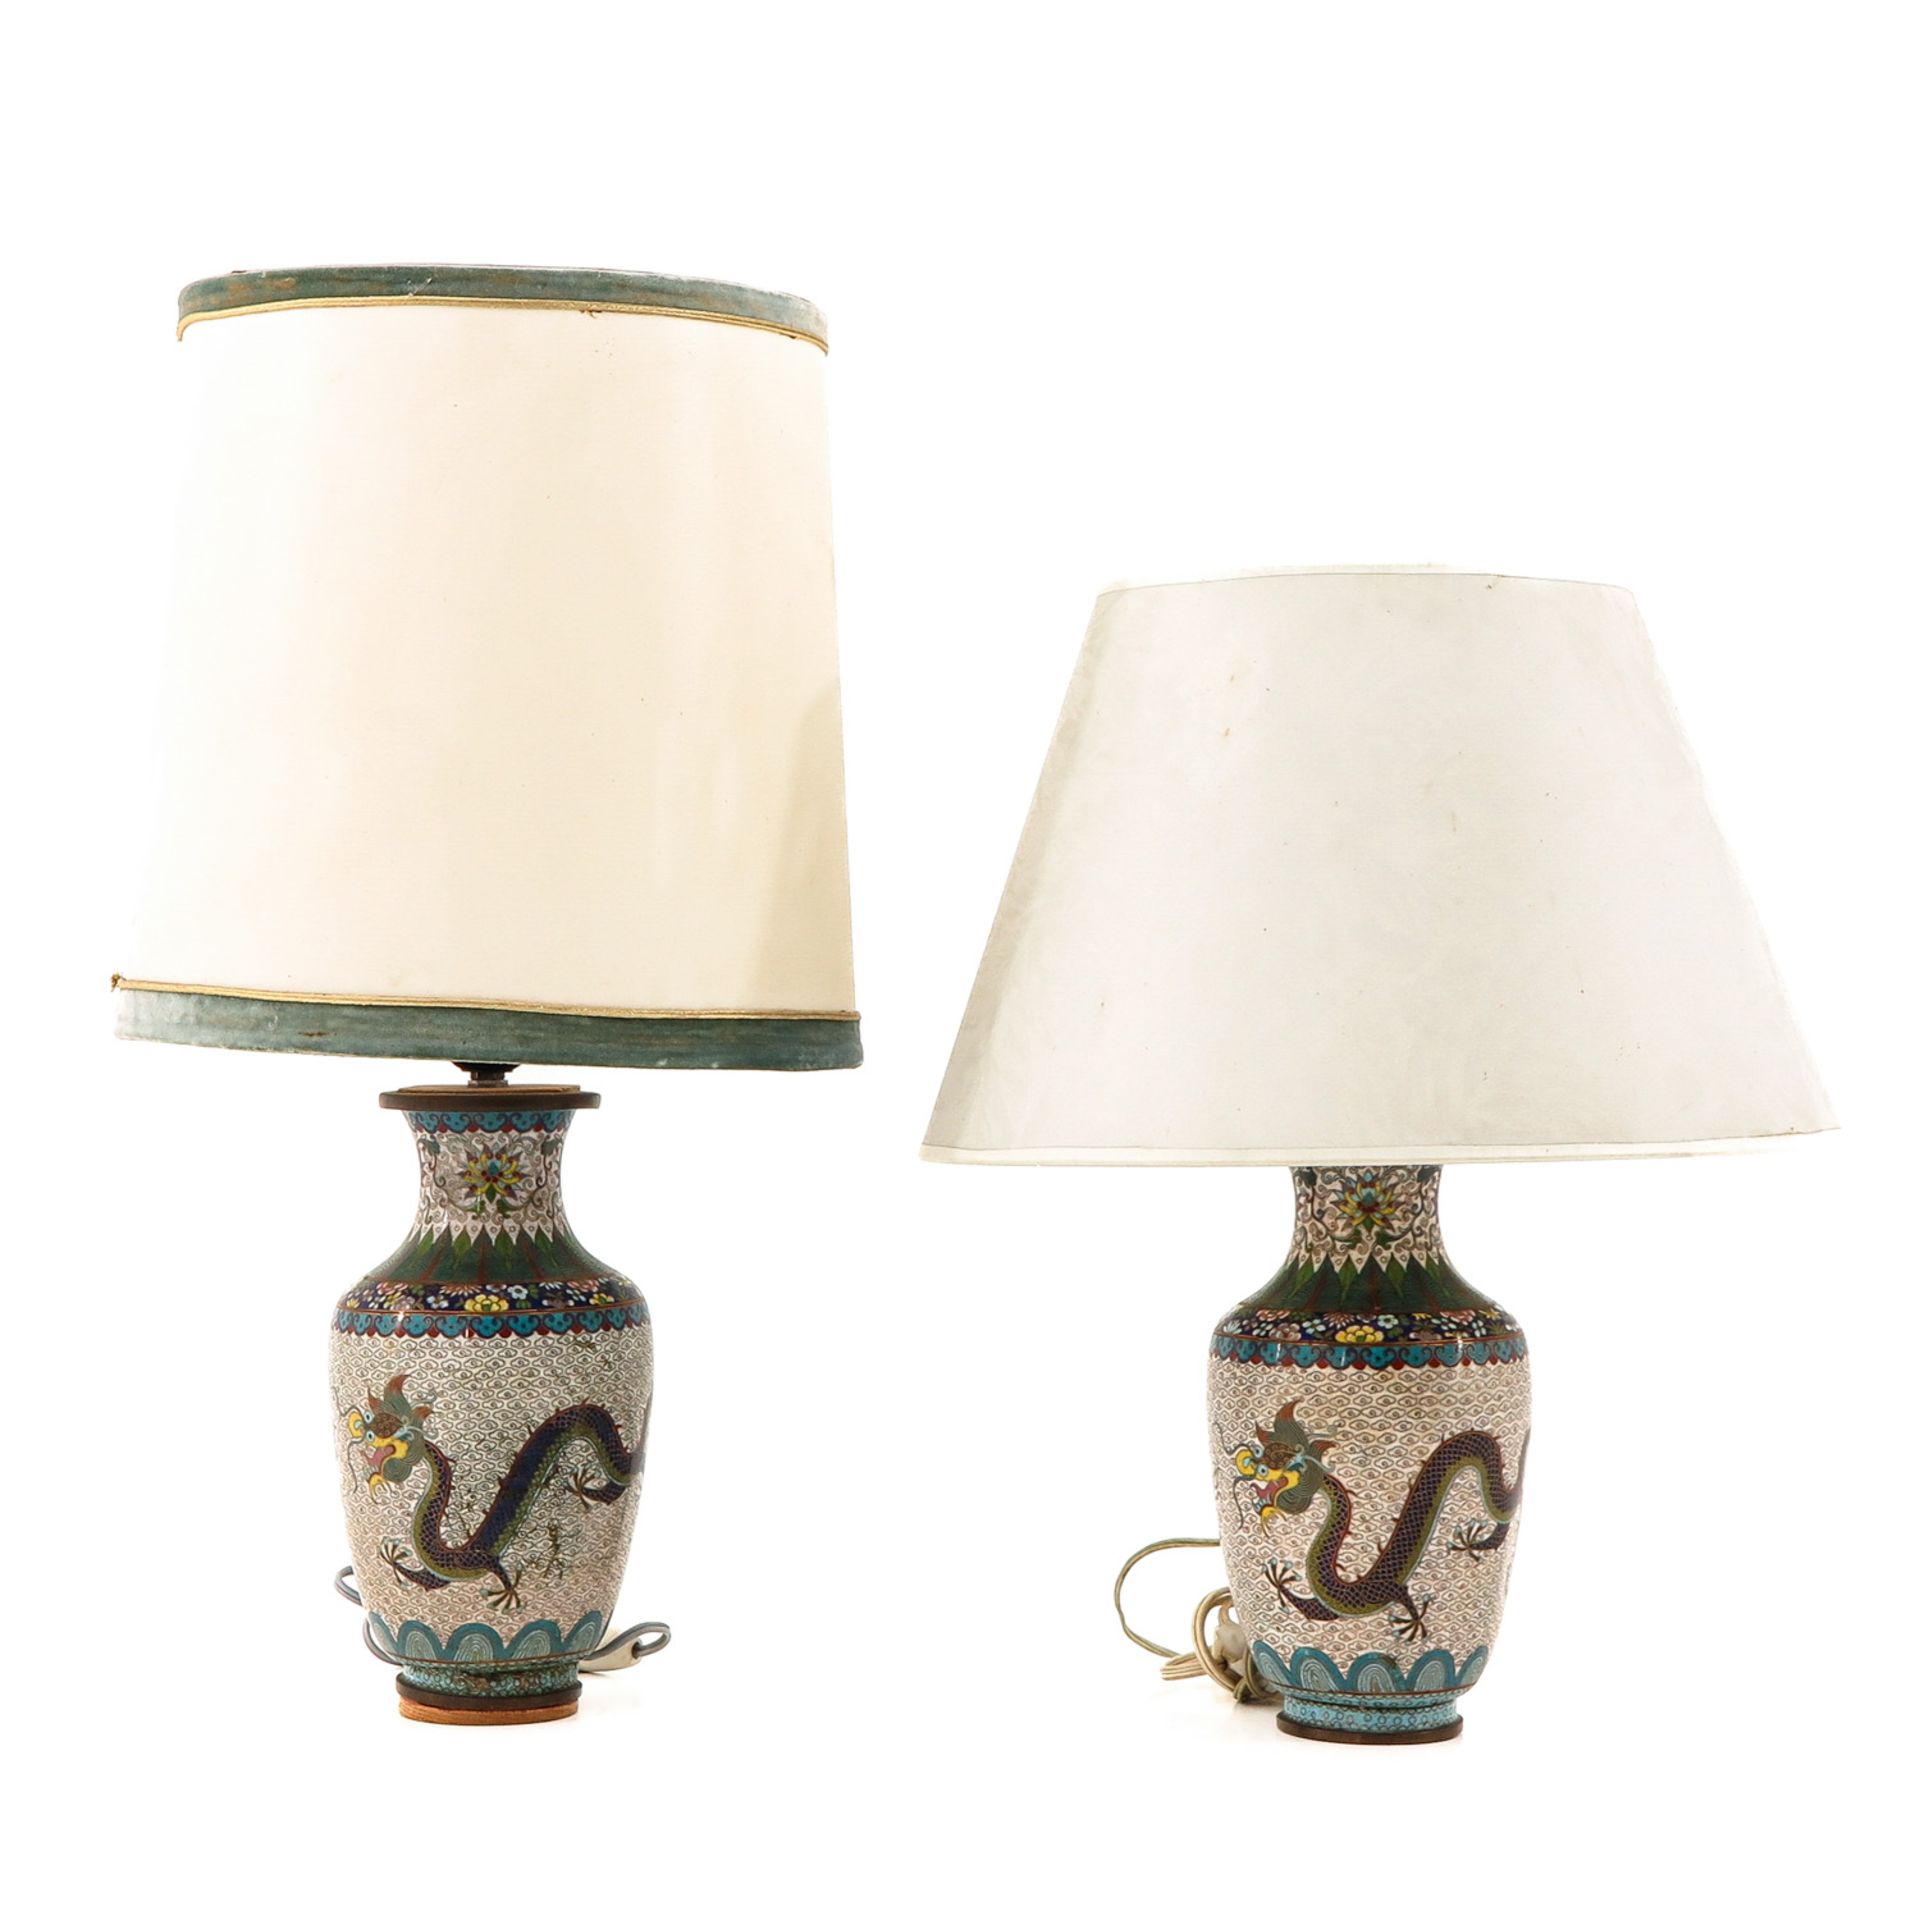 A Pair of Cloisonne Lamps - Image 2 of 9